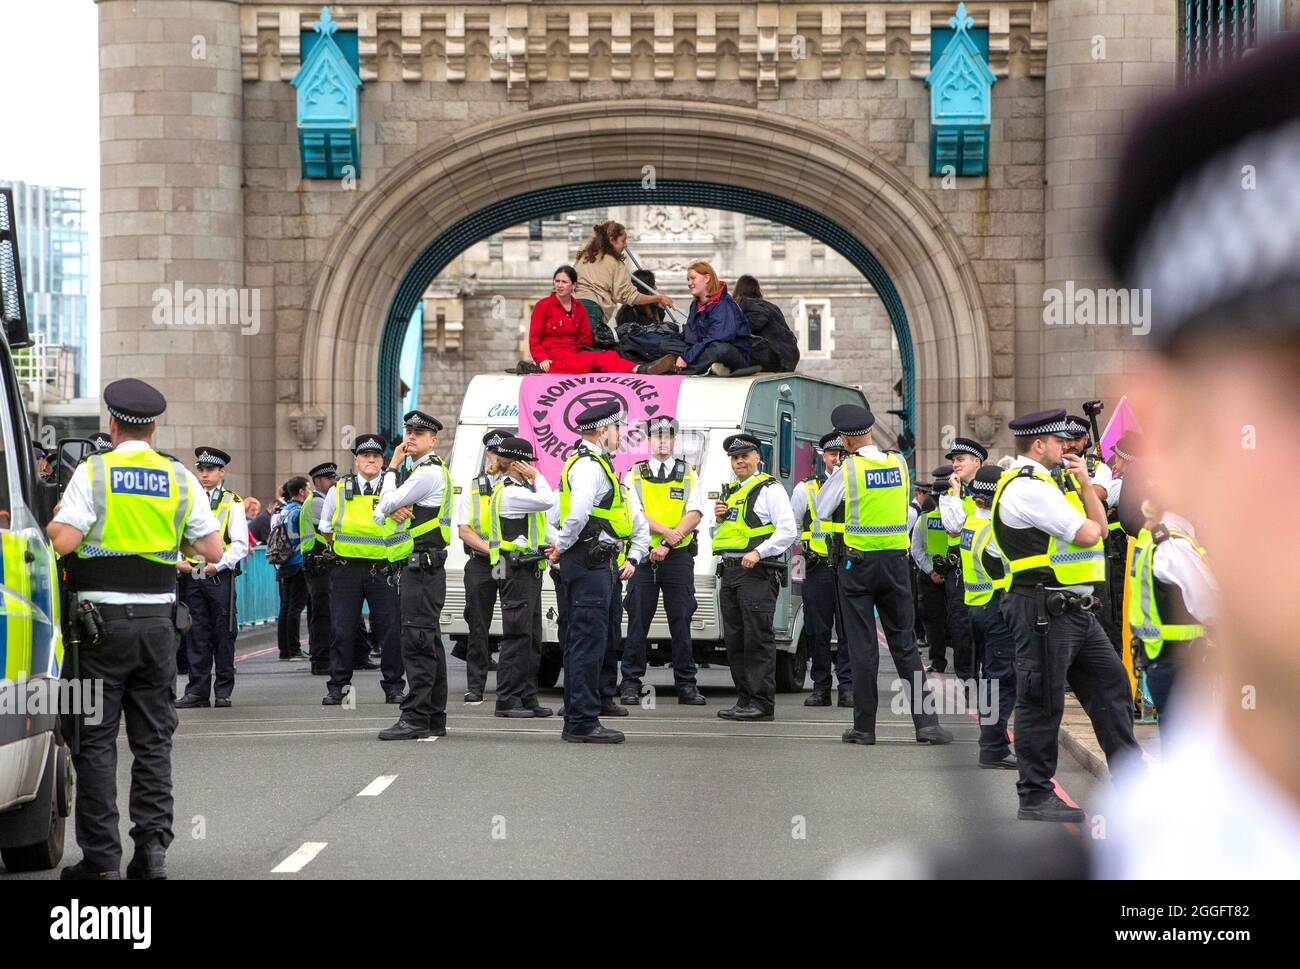 London, UK. 30th Aug, 2021. London, UK 30 8 21 Demonstrators on top of a caravan blocking the road at Tower Bridge. Members of Extinction Rebellion march from The Shard to Tower Bridge where supporters climb on top of a caravan and block the road. Extinction Rebellion Credit: Mark Thomas/Alamy Live News Stock Photo